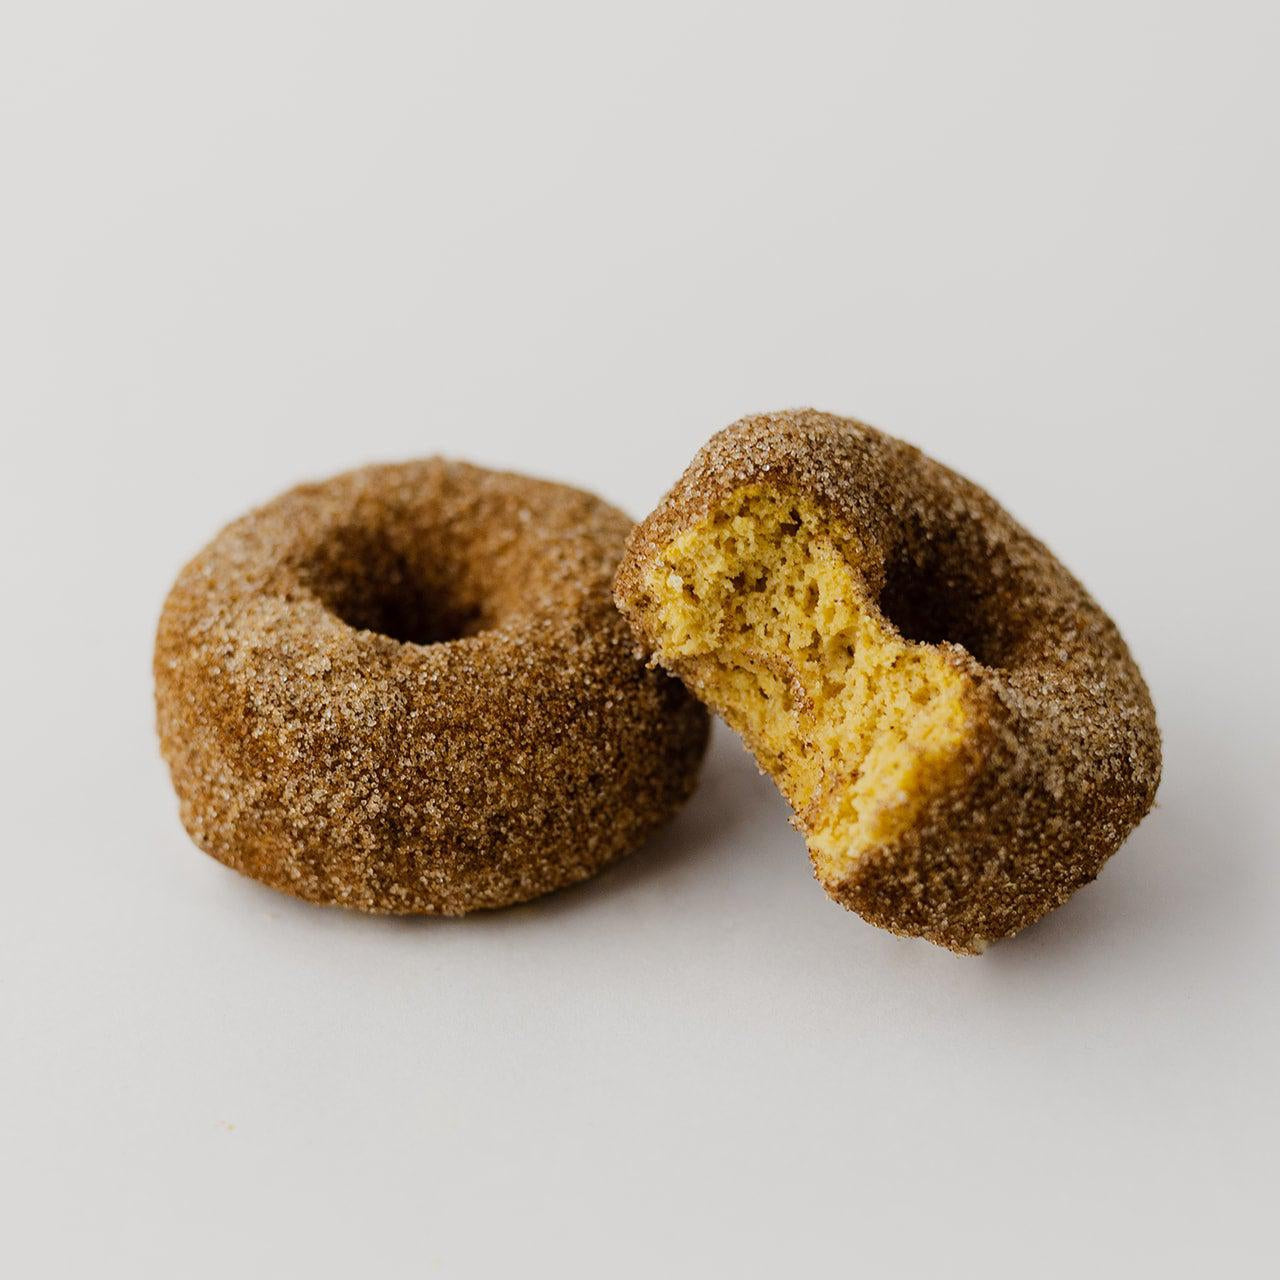 2 Cinnamon Sugar Donuts, 1 has a bite taken out of it